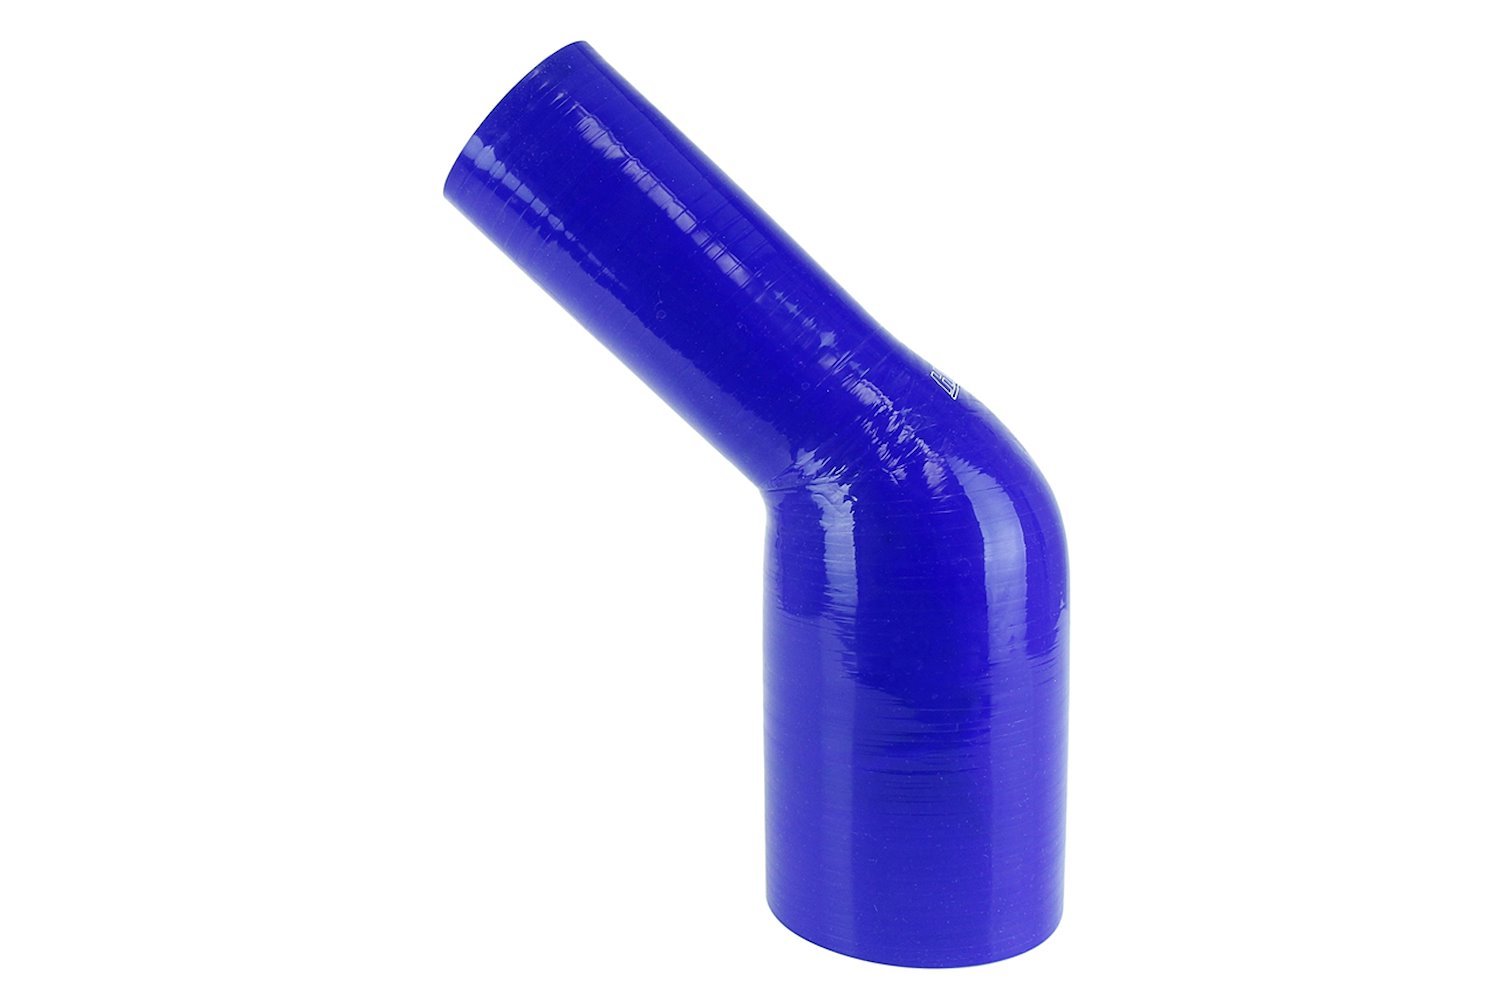 HTSER45-275-300-BLUE Silicone 45-Degree Elbow Hose, High-Temp 4-Ply Reinforced, 2-3/4 in. - 3 in. ID, Blue